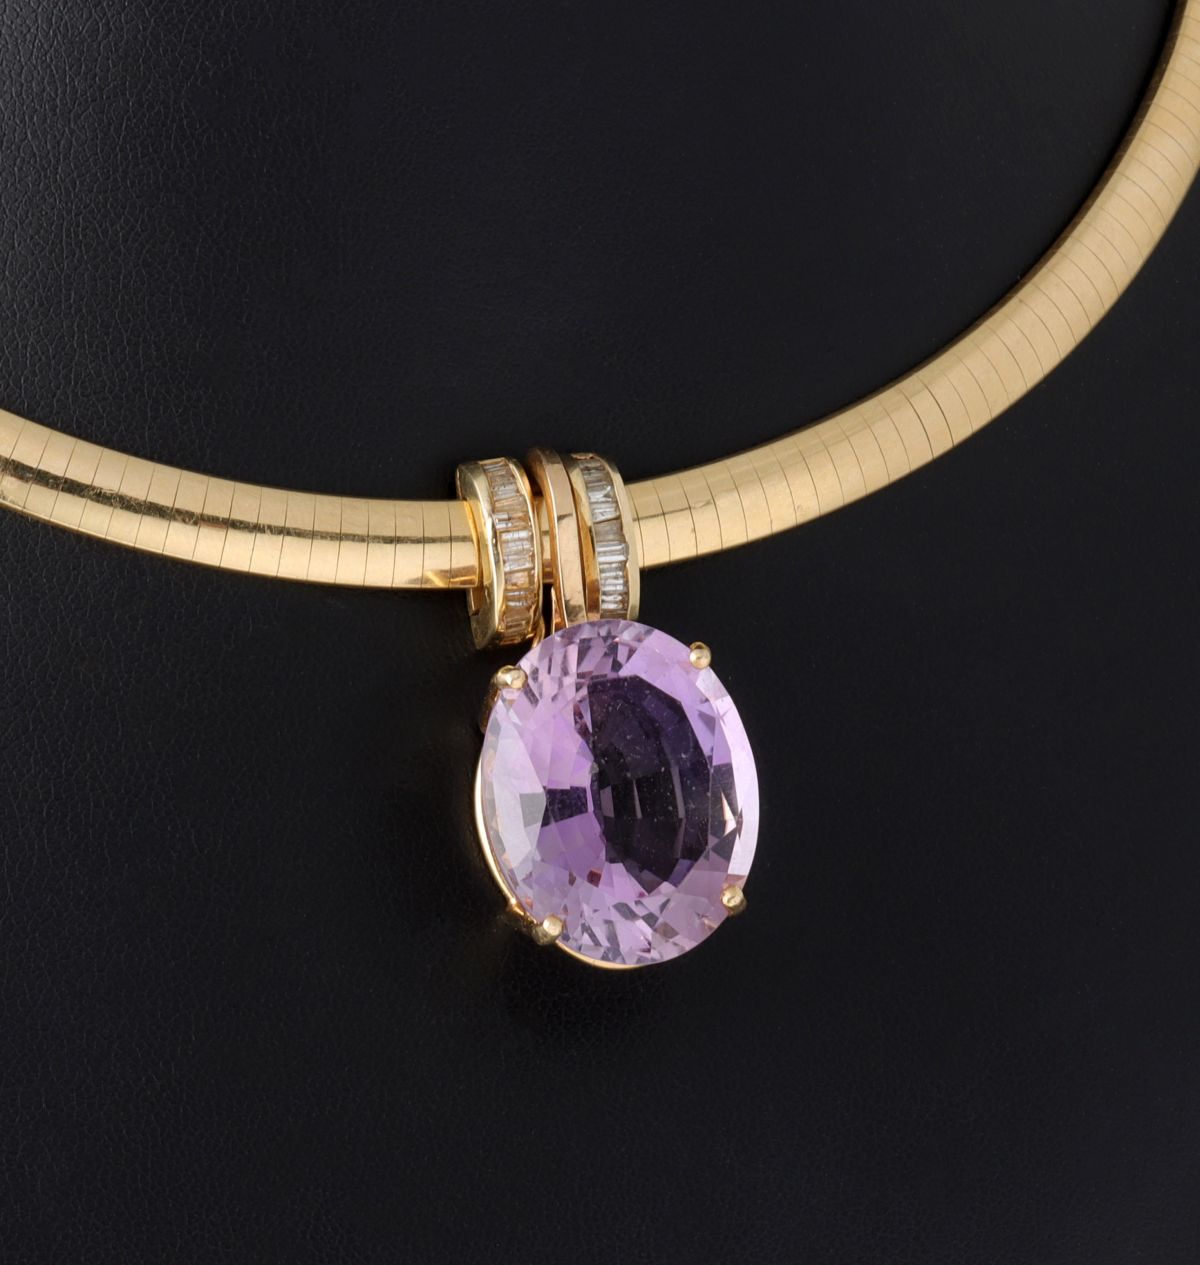 A 14K GOLD OMEGA CHOKER WITH DIAMONDS AND AMETHYST